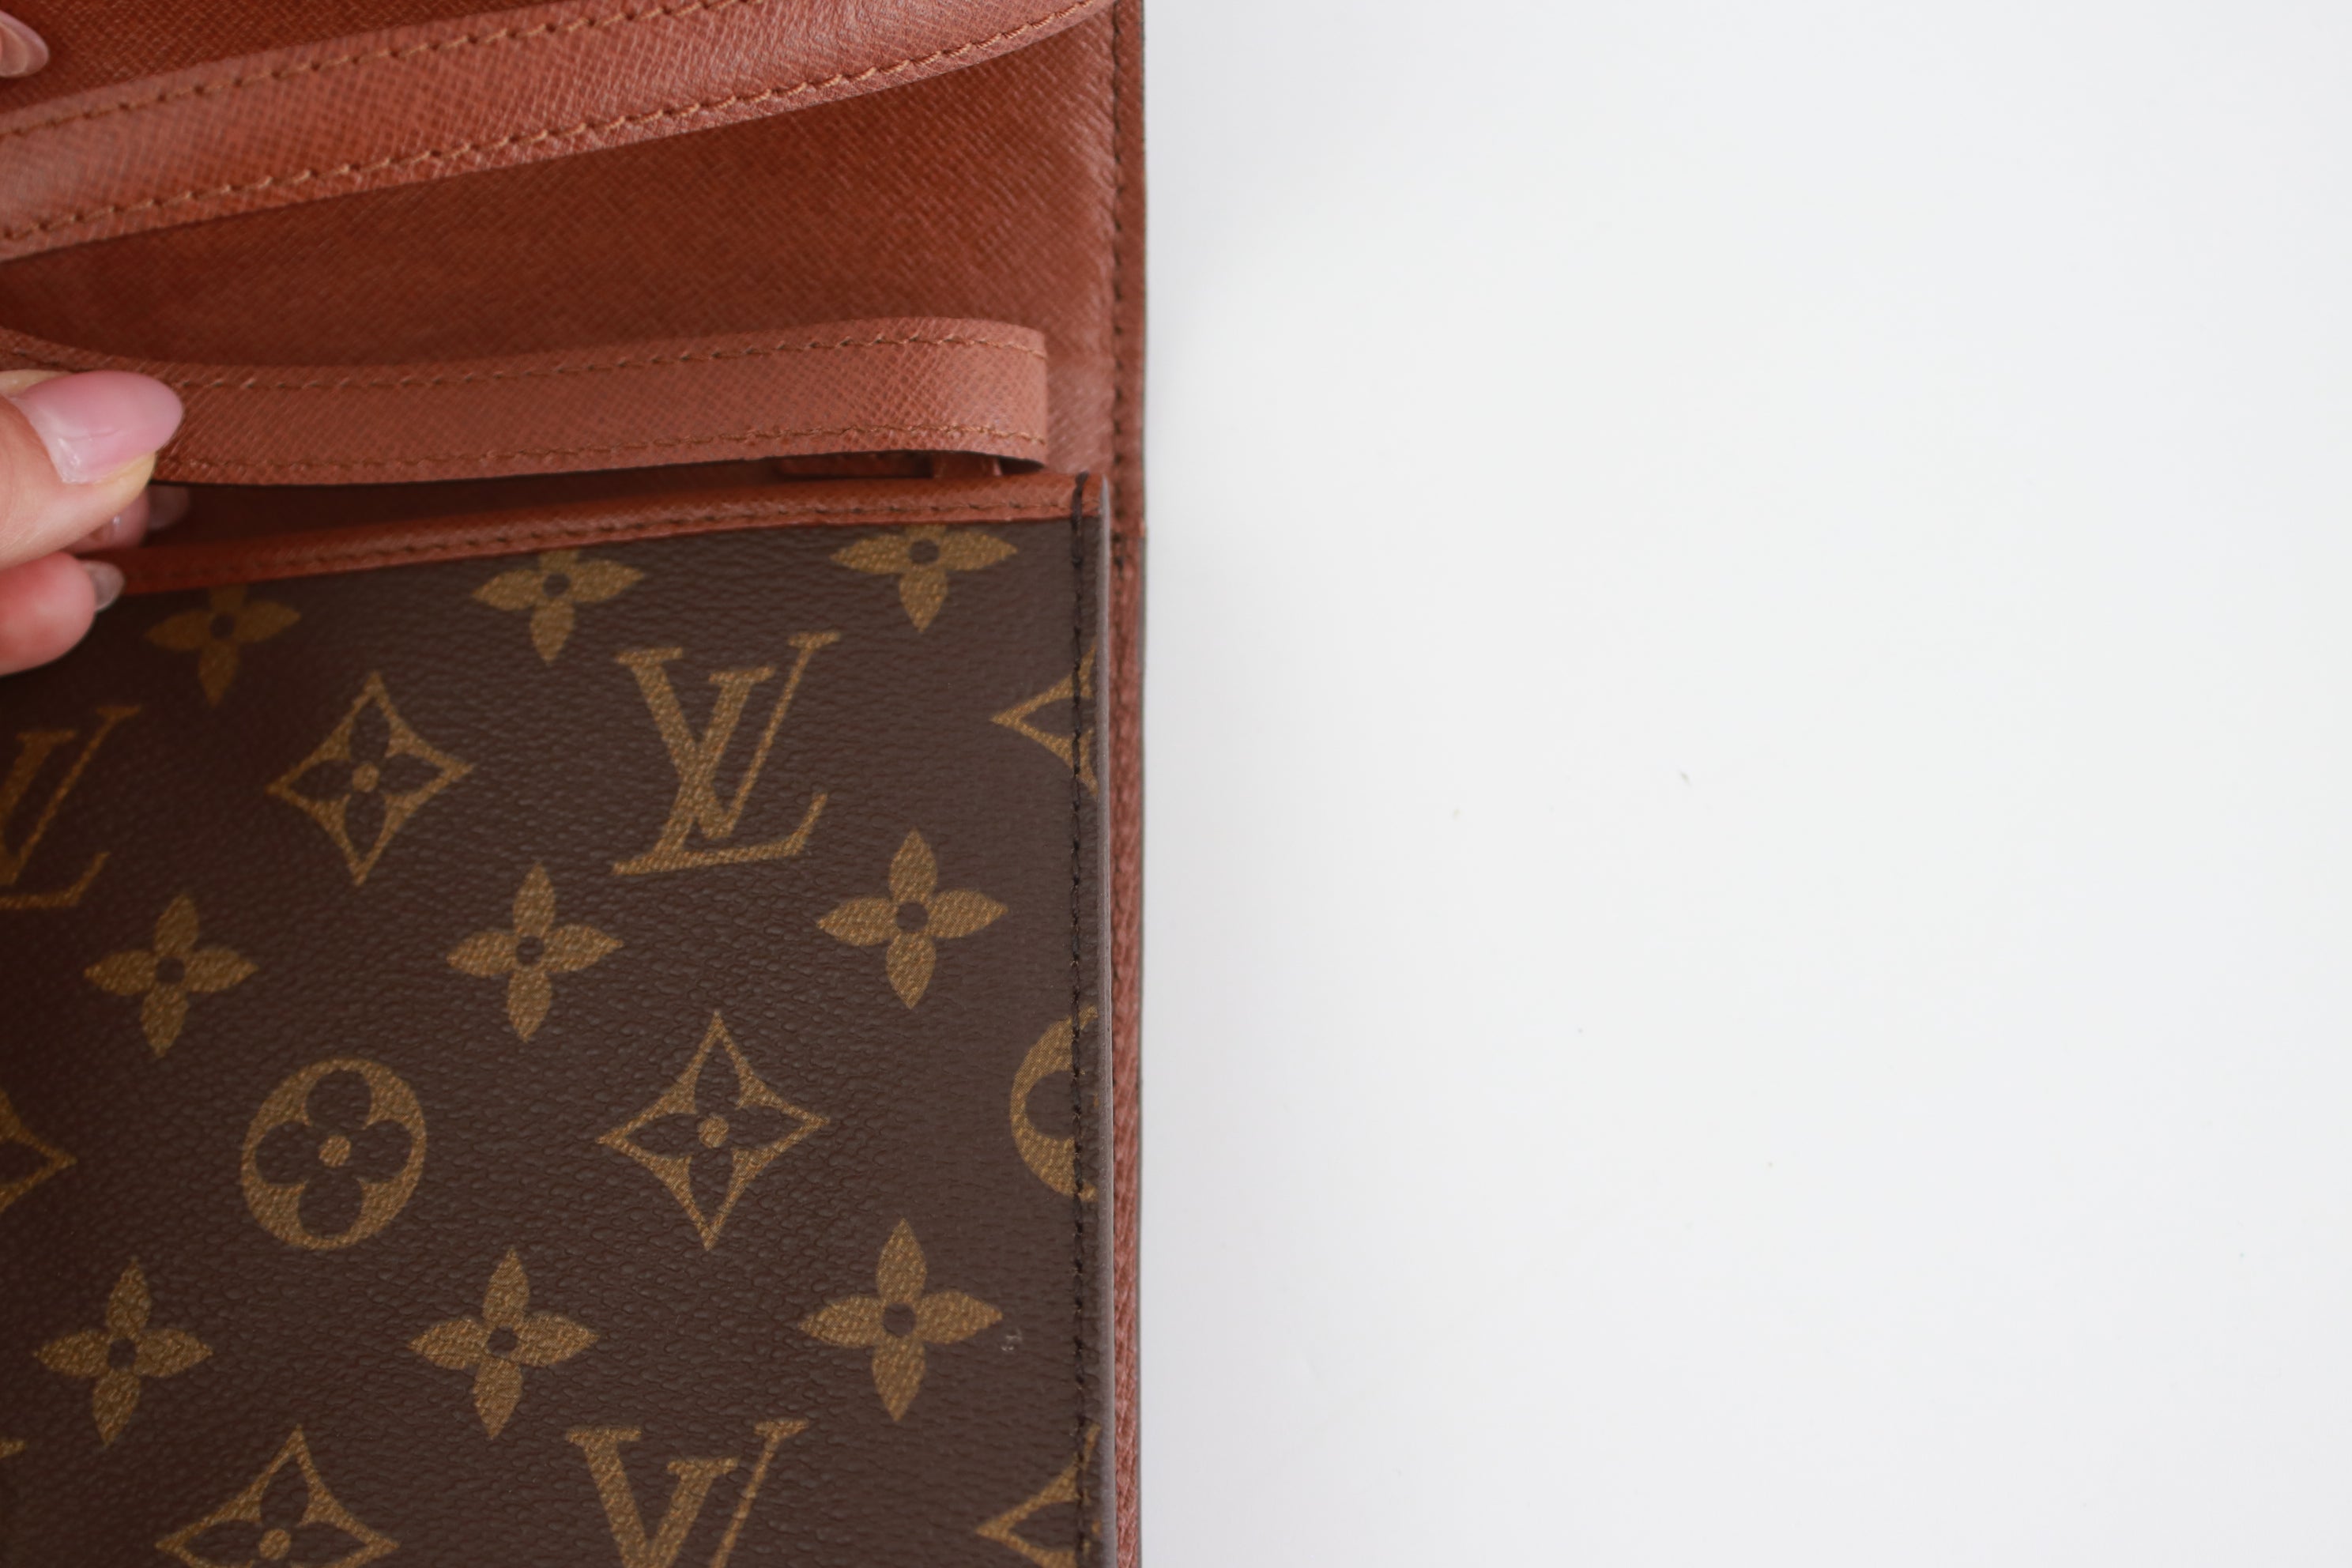 Louis Vuitton Trunks & Bags Wallet - One Savvy Design Consignment